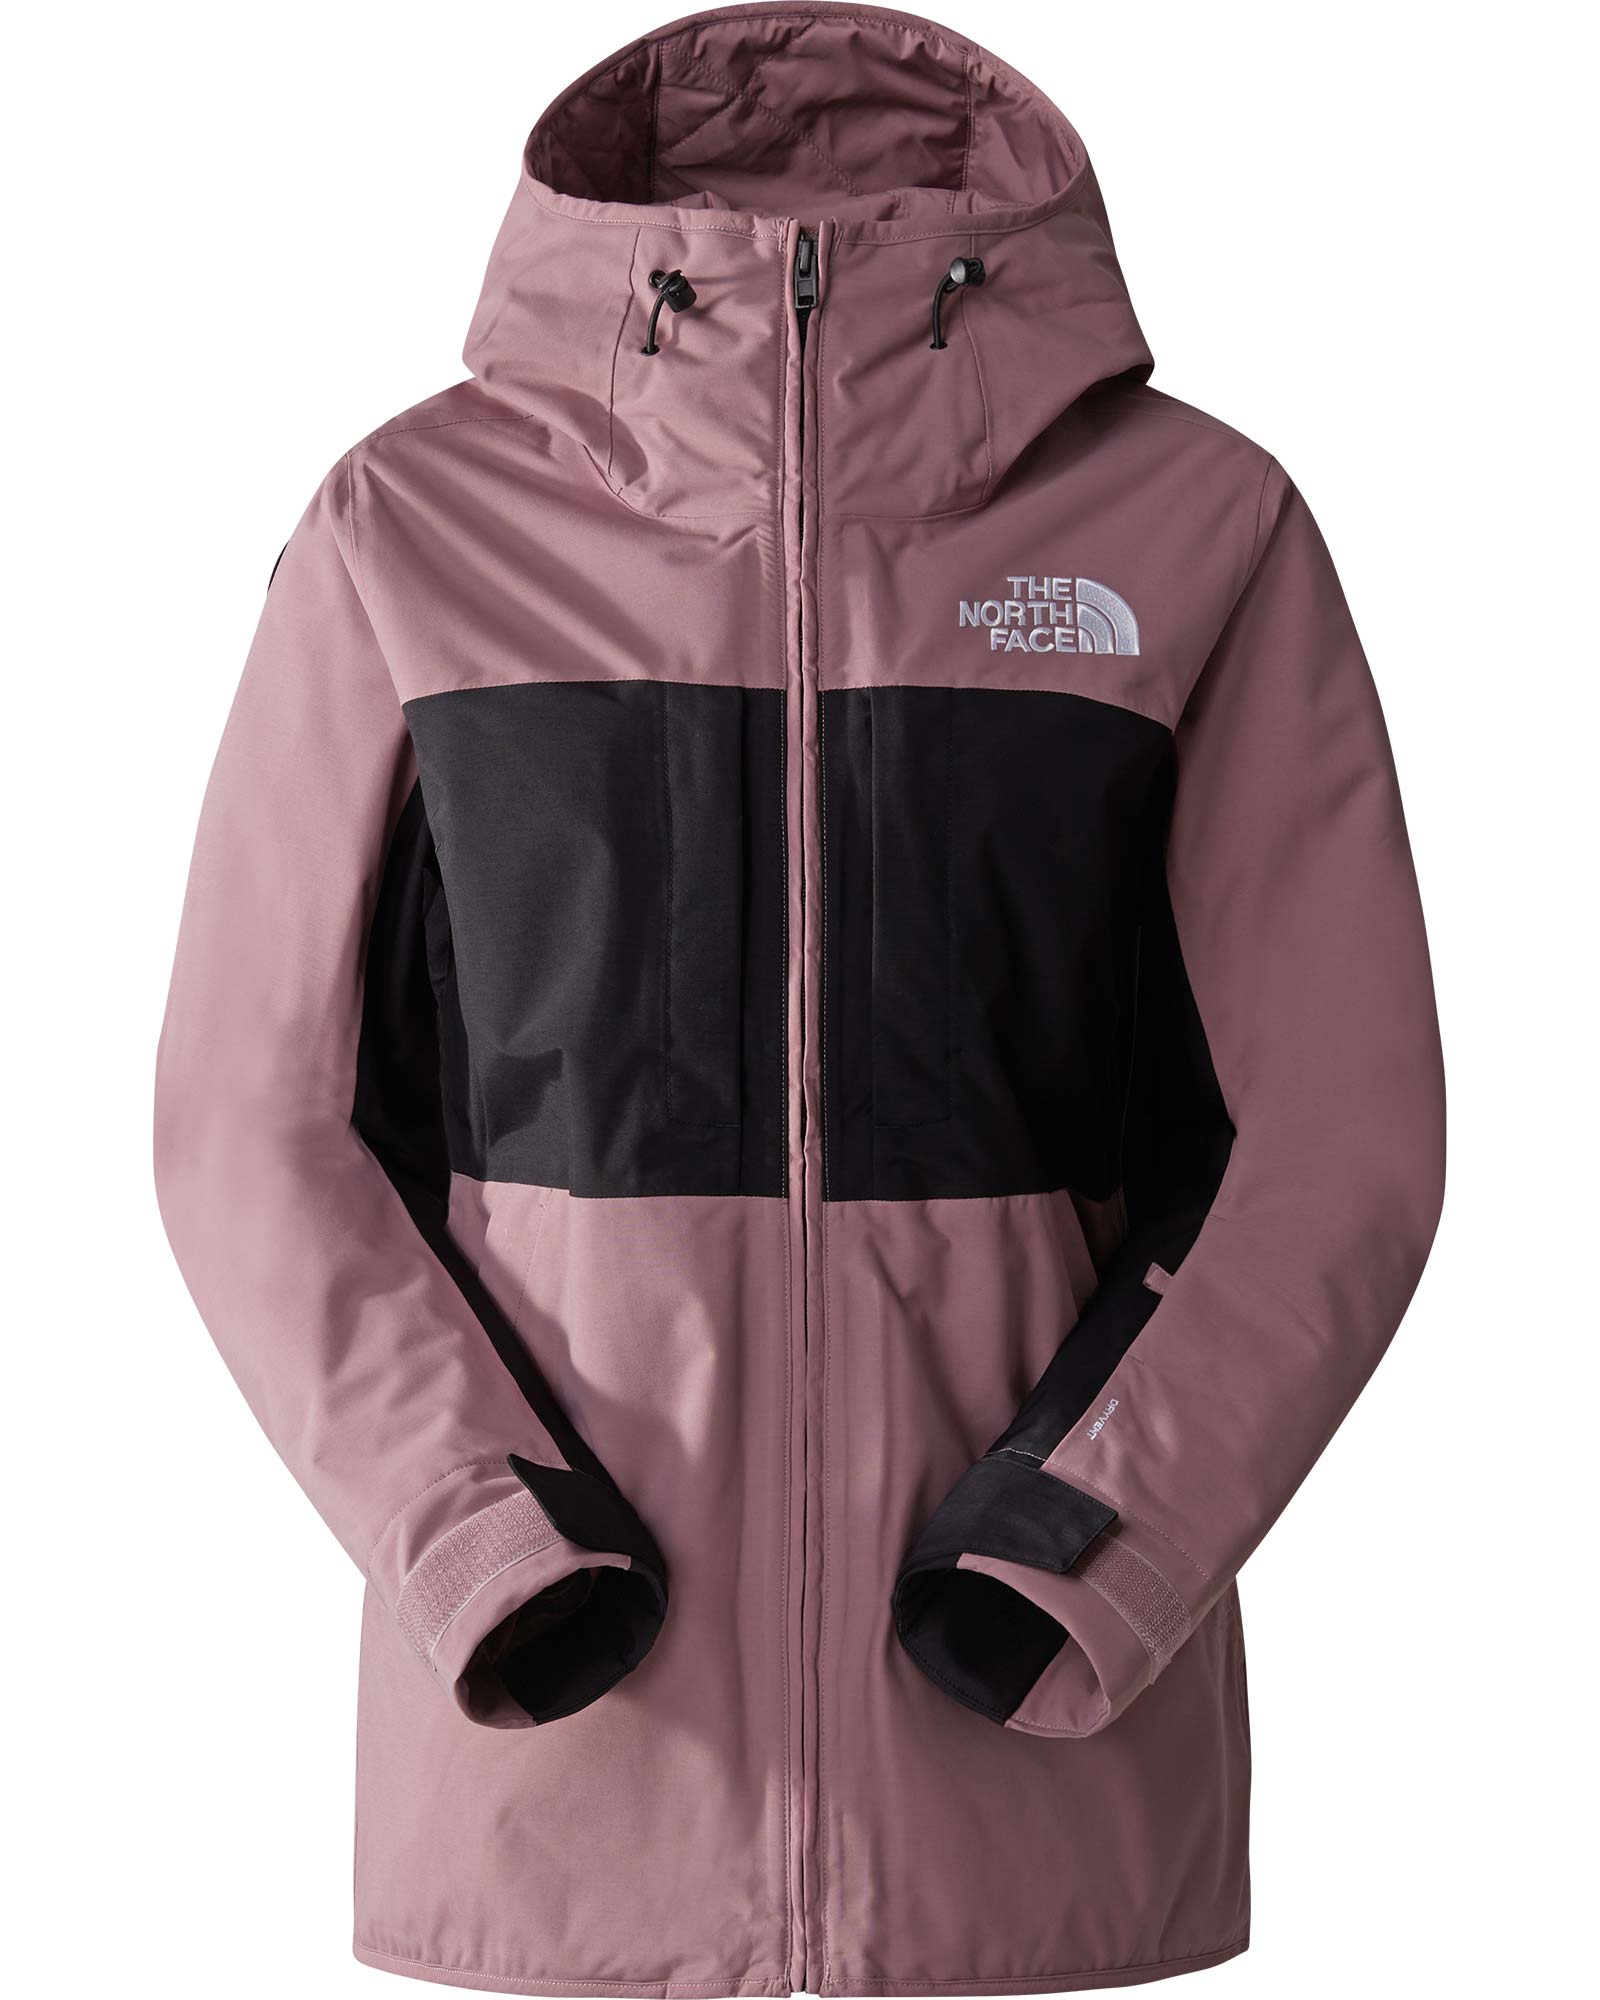 The North Face Women’s Namak Insulated Jacket - Fawn Grey/TNF Black XS